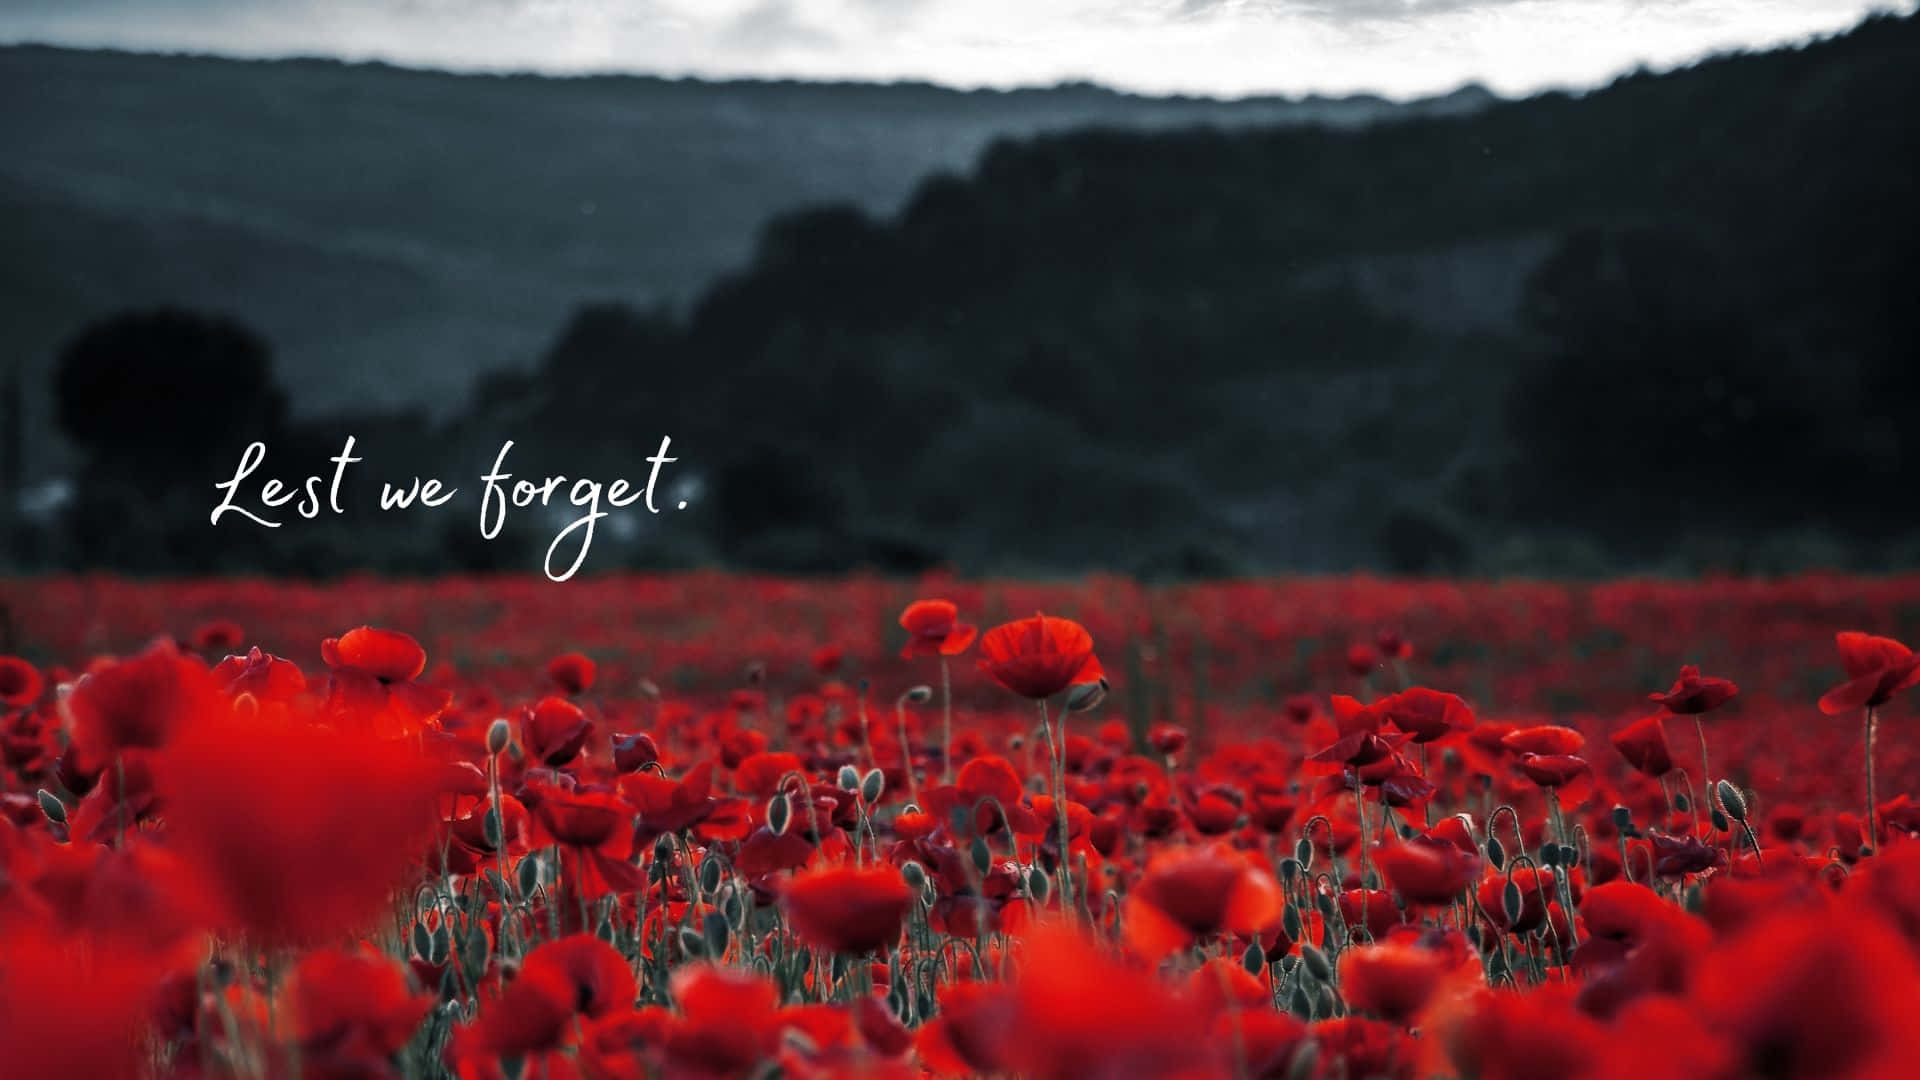 “Lest we forget” - A respectful tribute to those who sacrificed for their country.